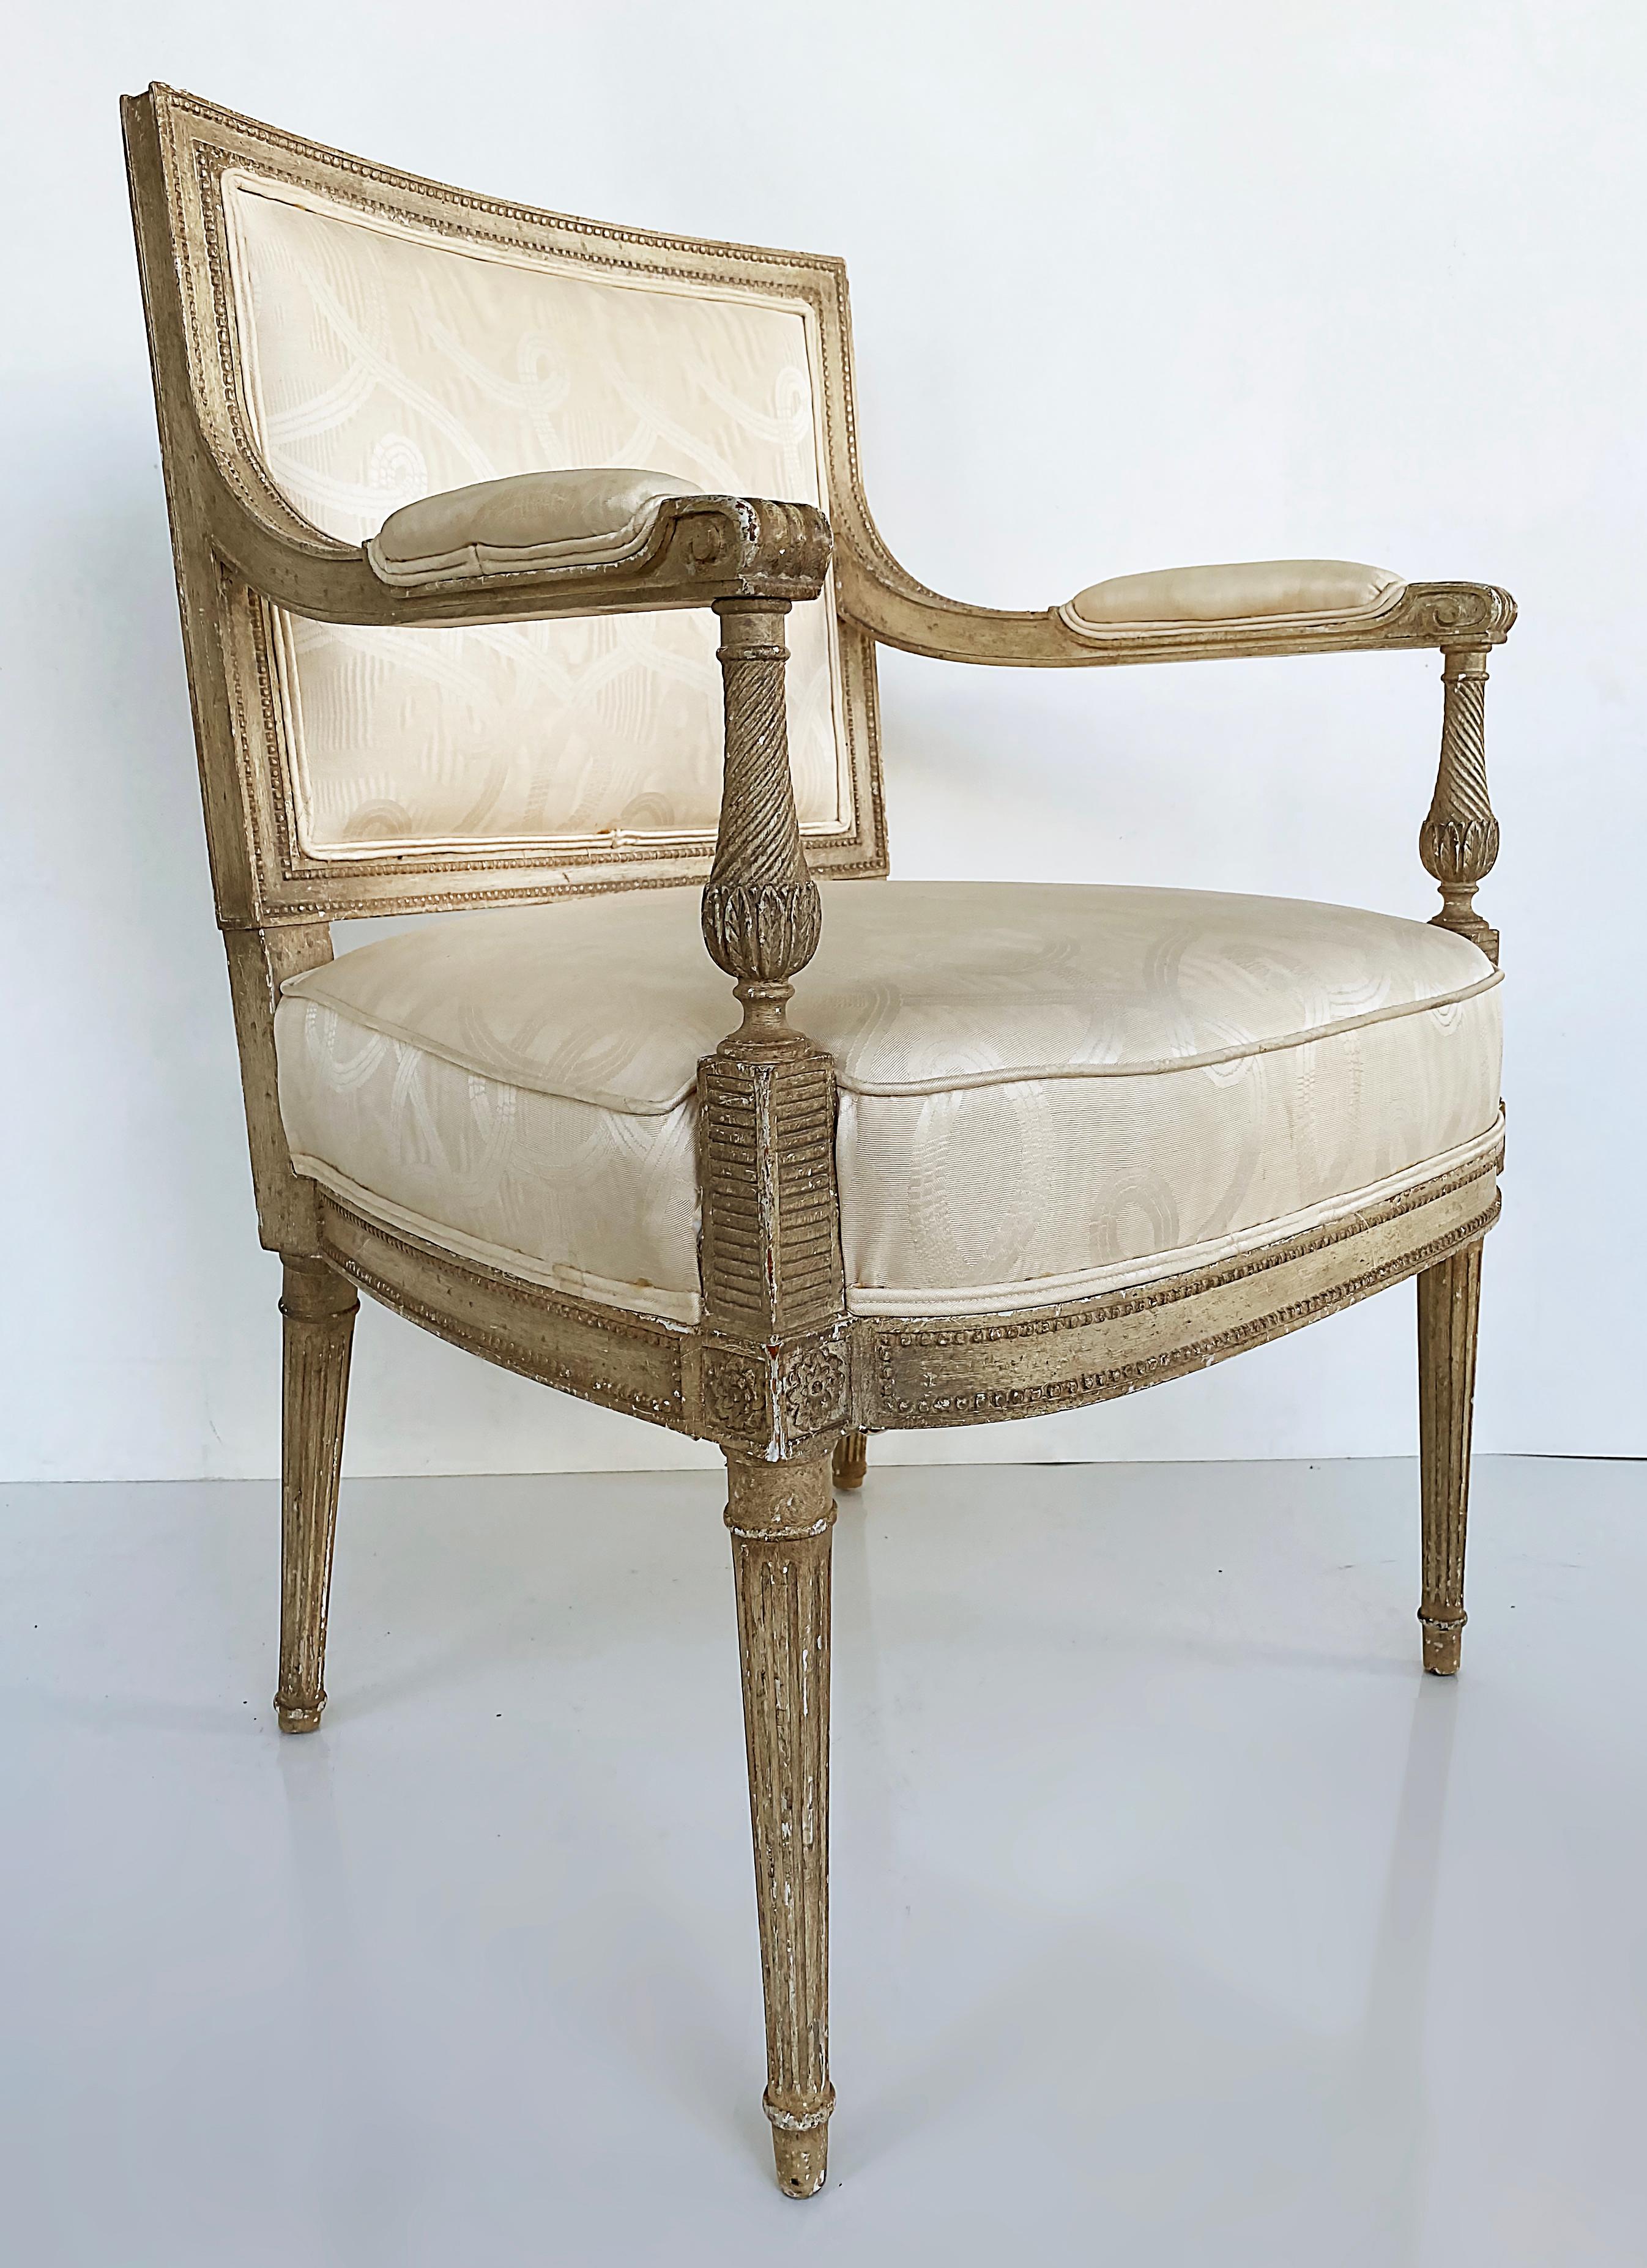 French Louis XVI Style Painted Fauteuil Armchairs, Late 19th Century -Early 20th For Sale 4